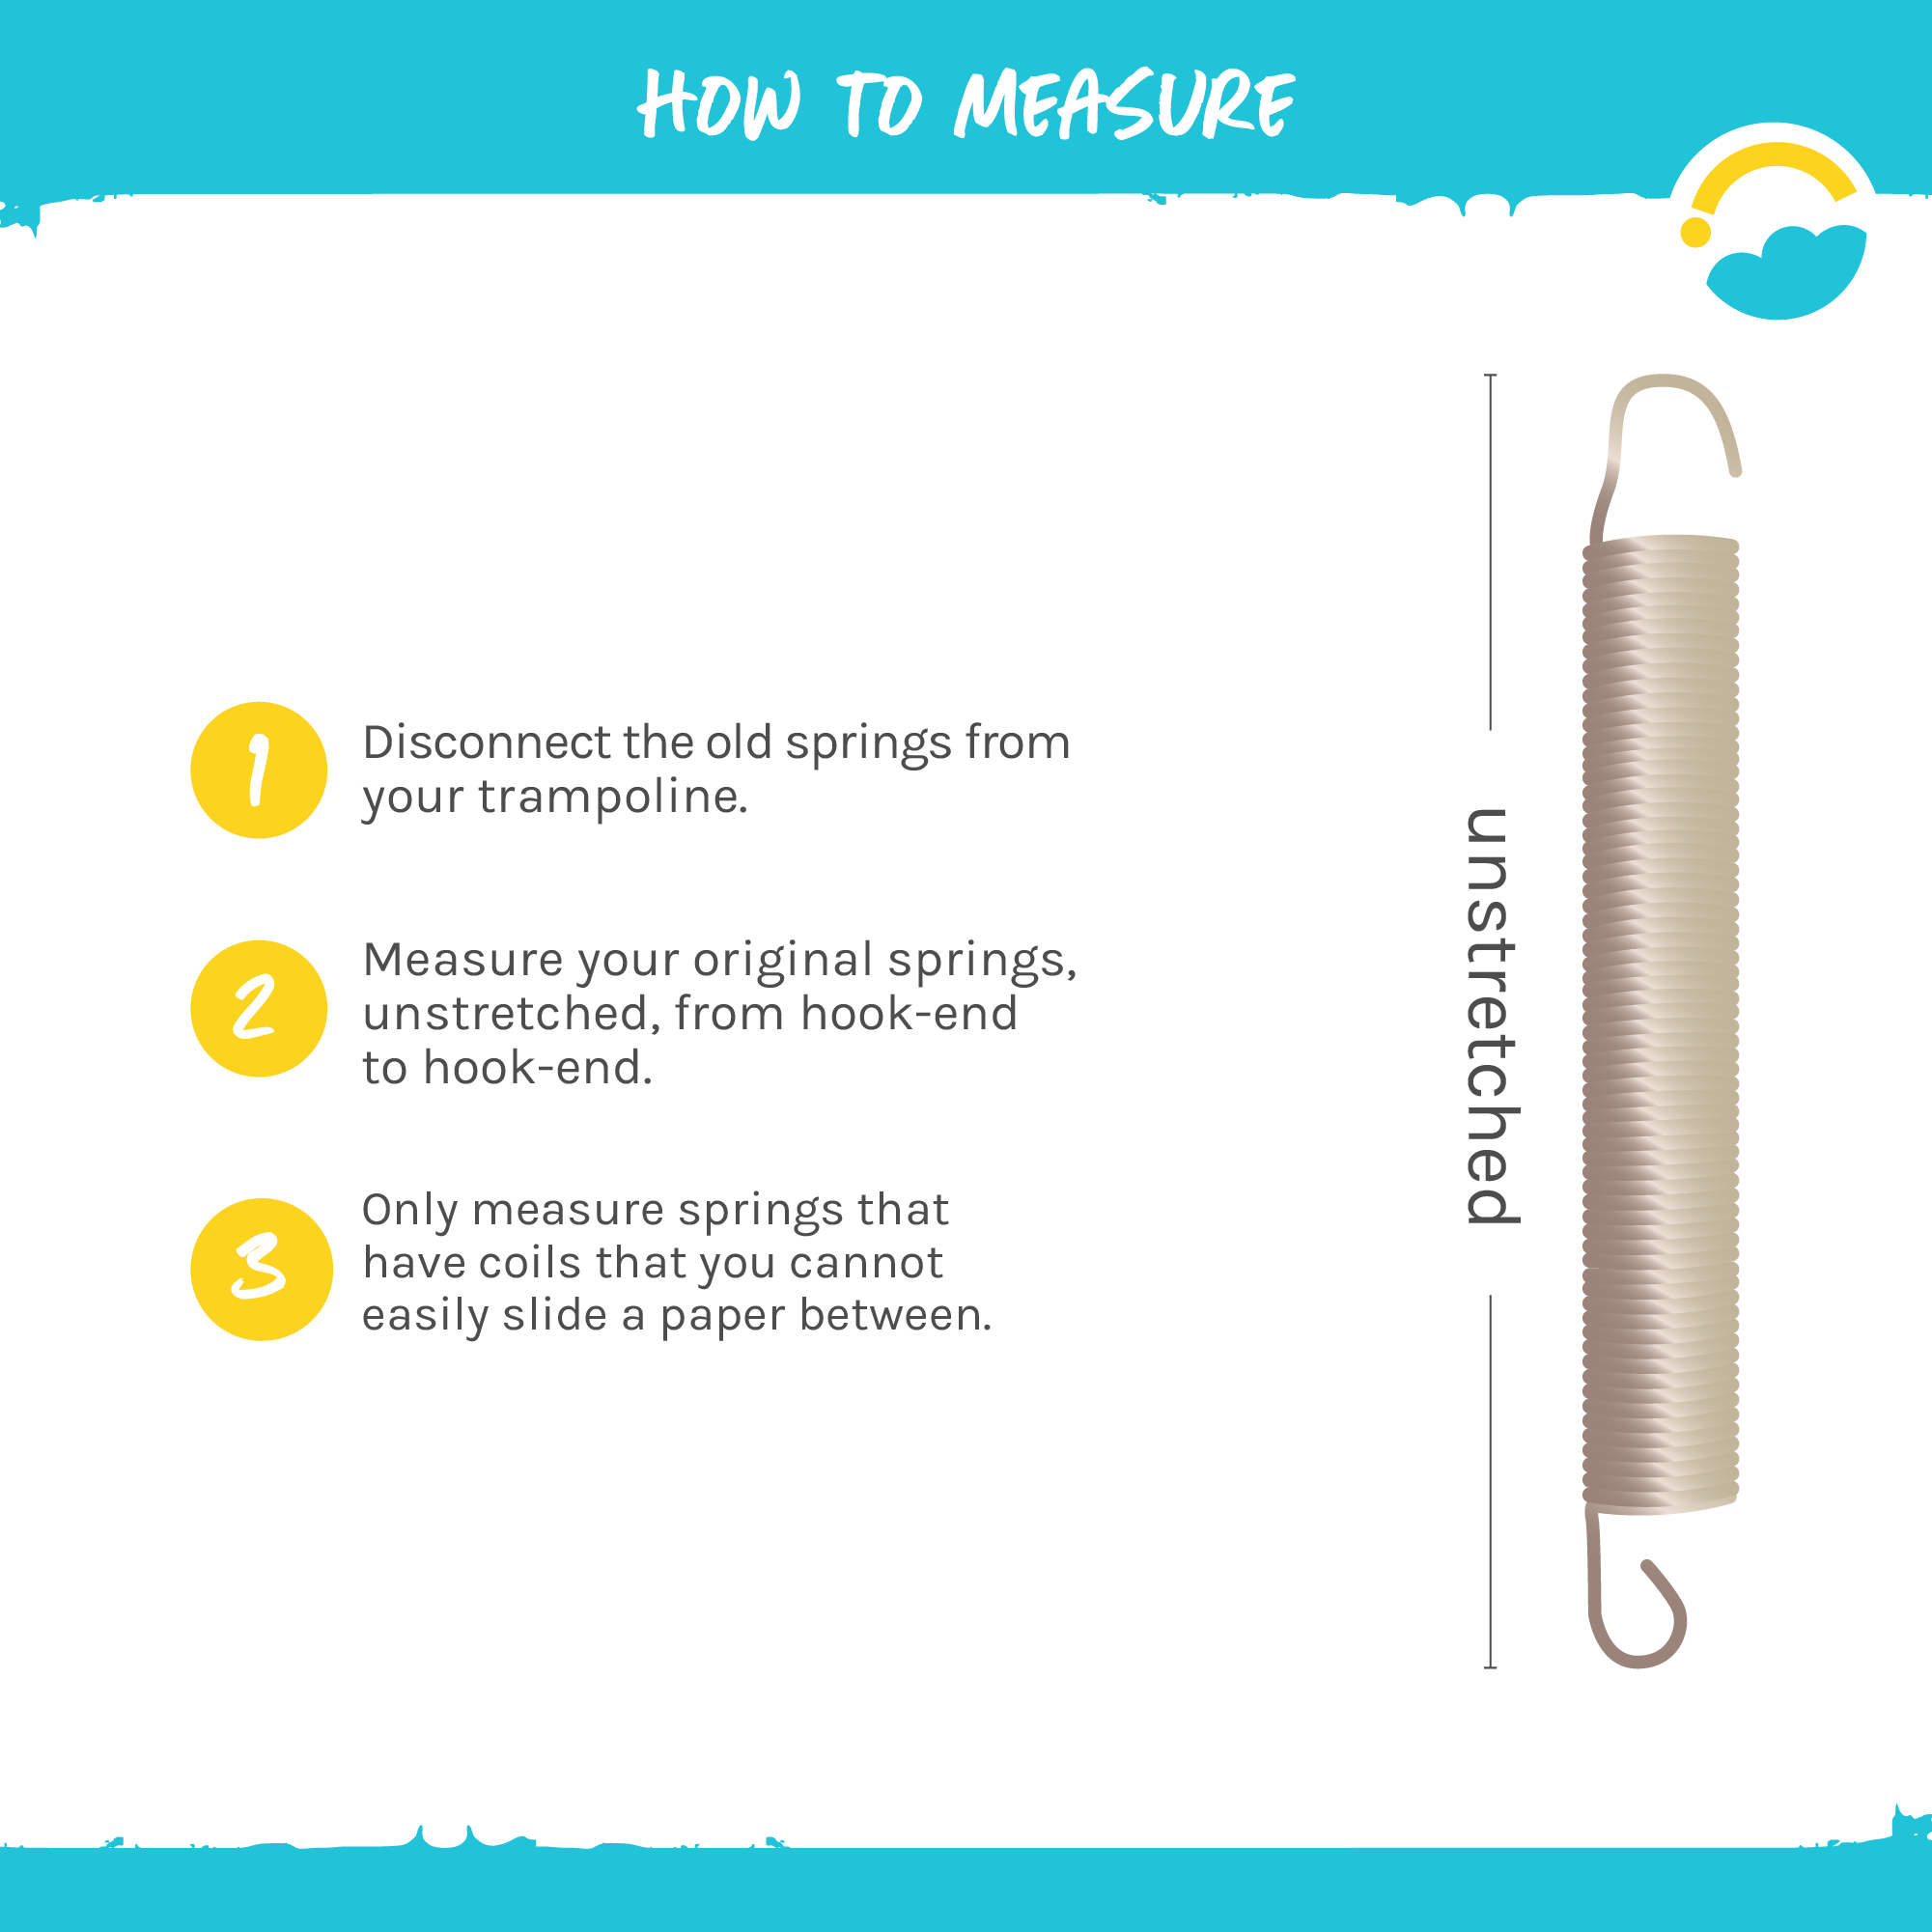 How to Measure: 1-Disconnect the old springs from your trampoline. 2-Measure your original springs, unstretched, from hook-end to hook-end. 3-Only measure springs that have coils that you cannot easily slide a paper between.